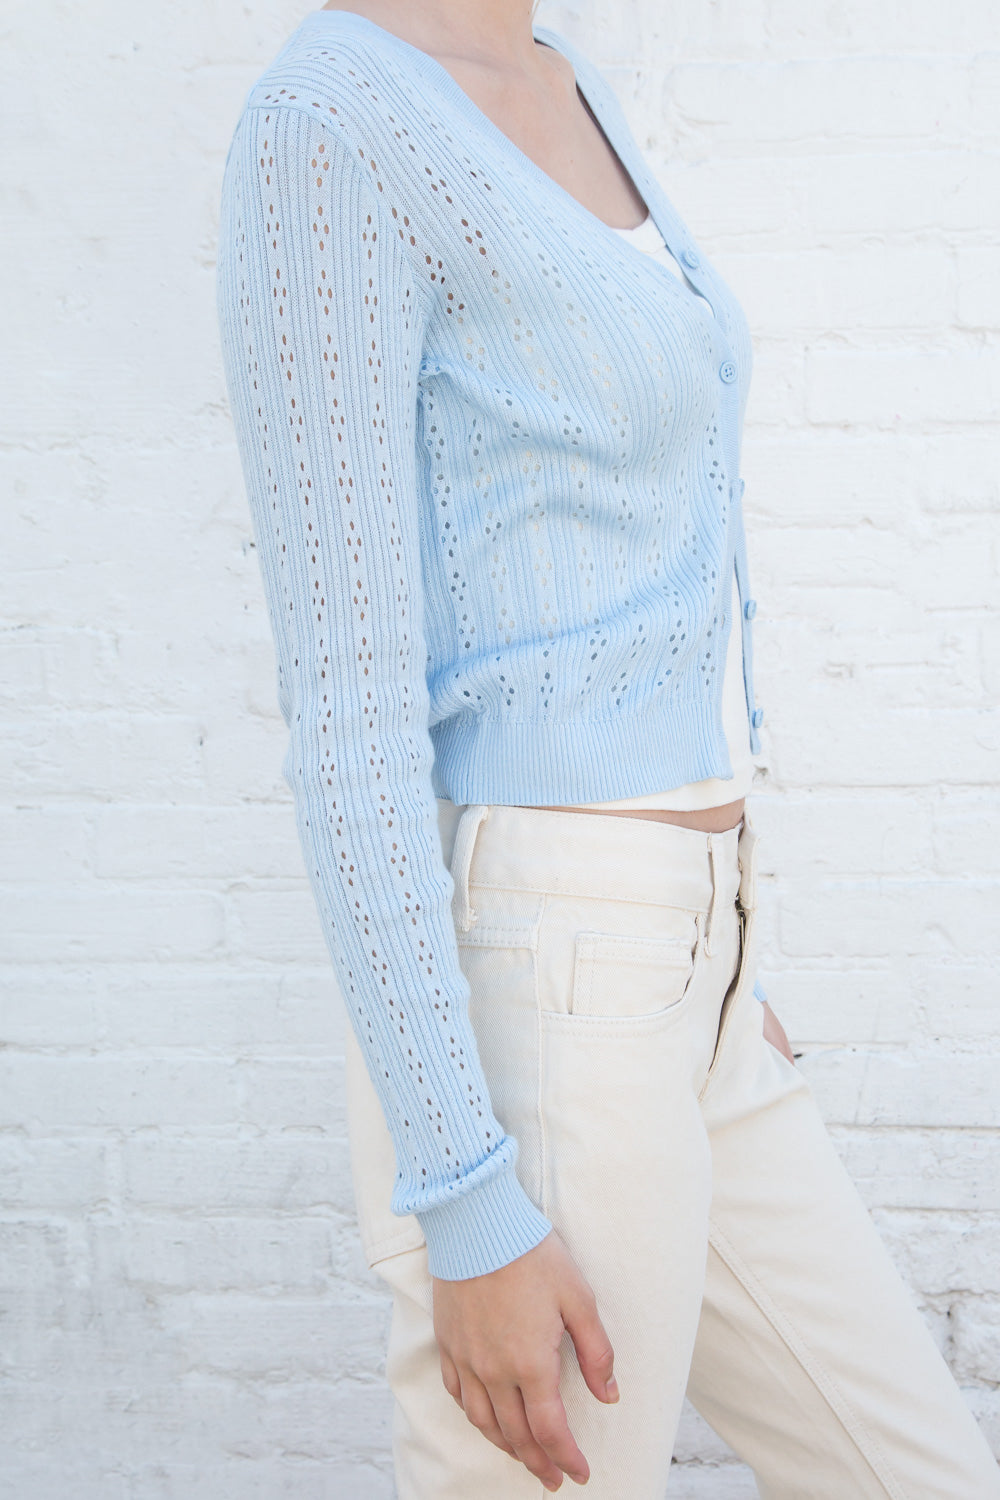 BNWT Light Blue Shannon Sweater Brandy Melville, Women's Fashion, Tops,  Other Tops on Carousell